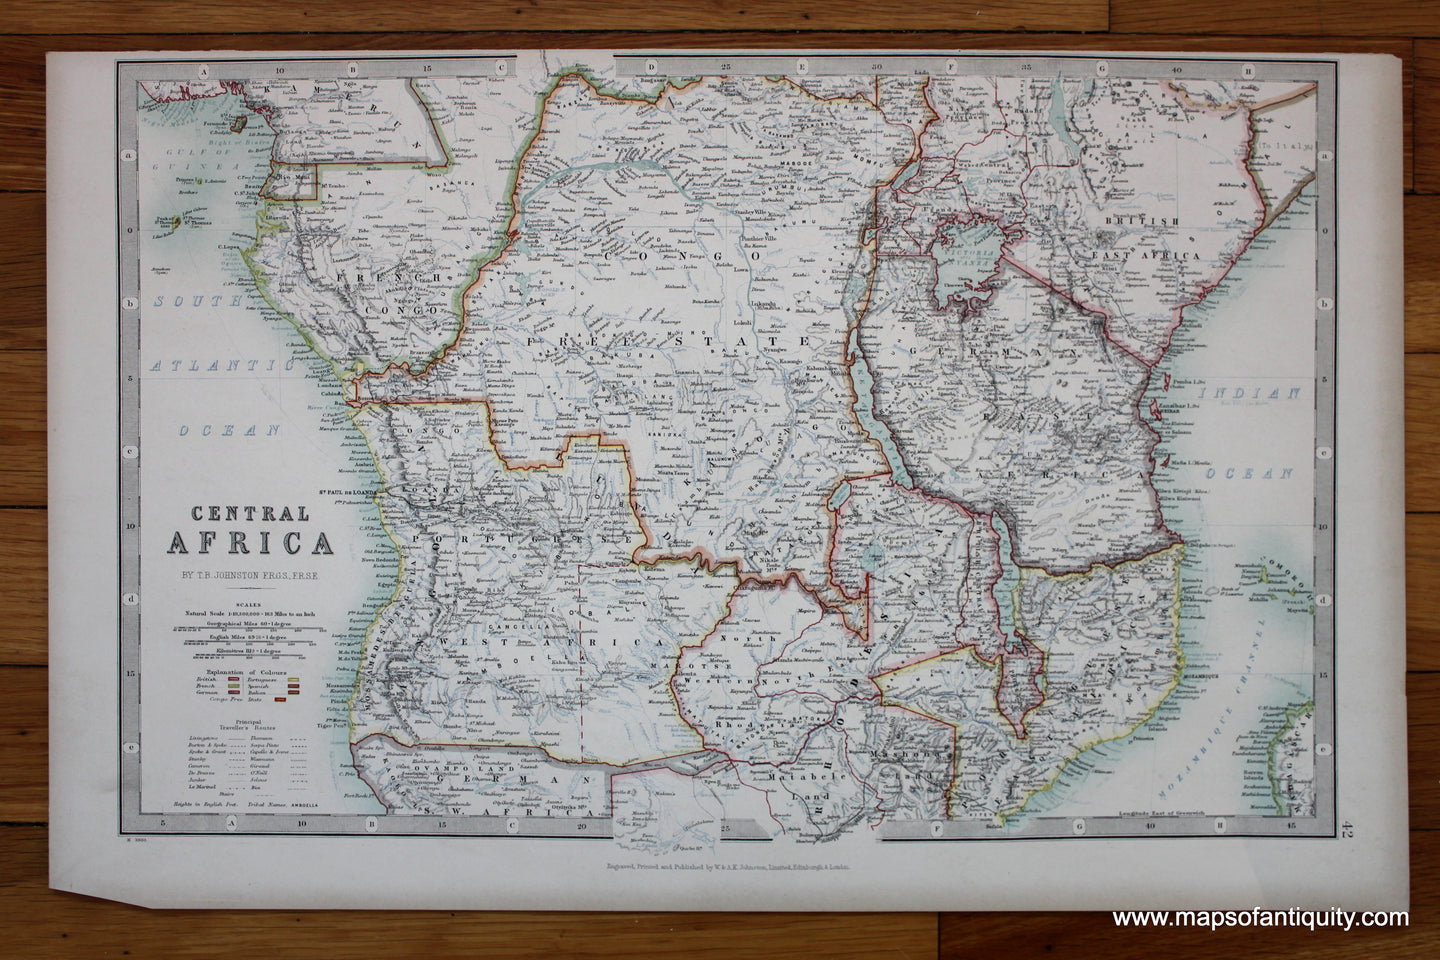 Antique-Printed-Color-Map-Central-Africa-Africa-Africa-Other-1904-Johnston-Maps-Of-Antiquity